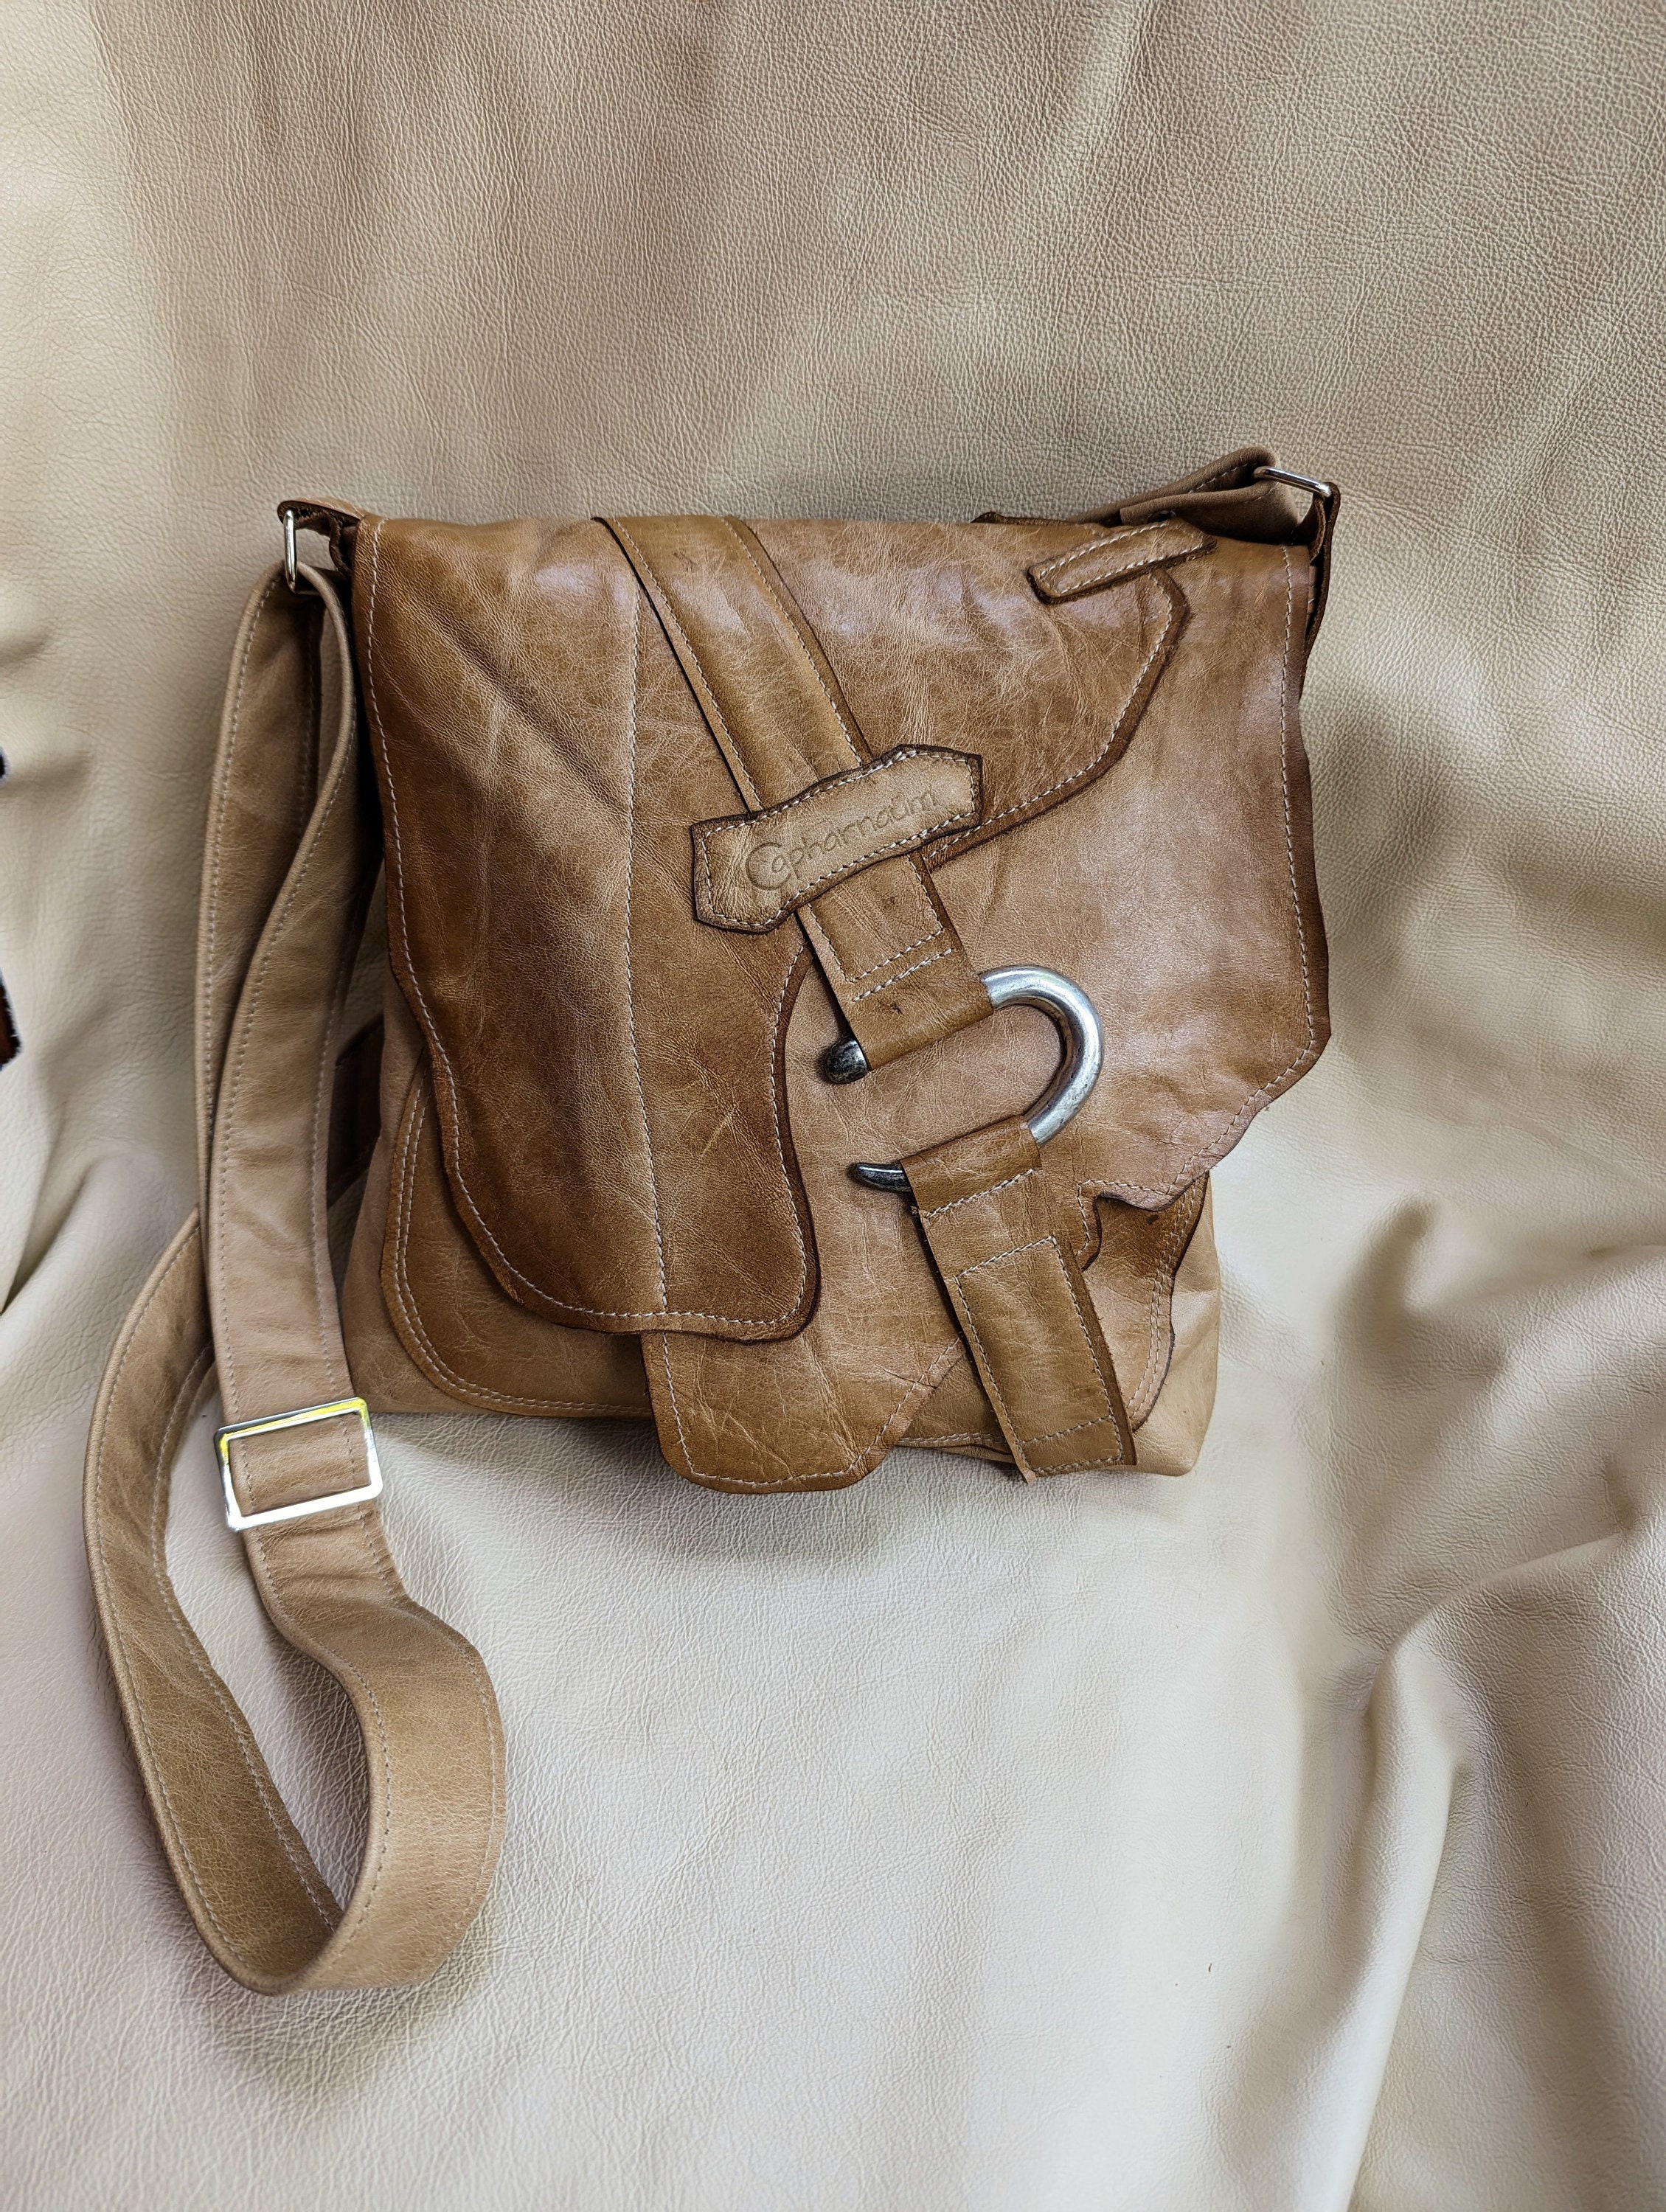 Still in love with our classic Moyen Messenger, this one is in Tan